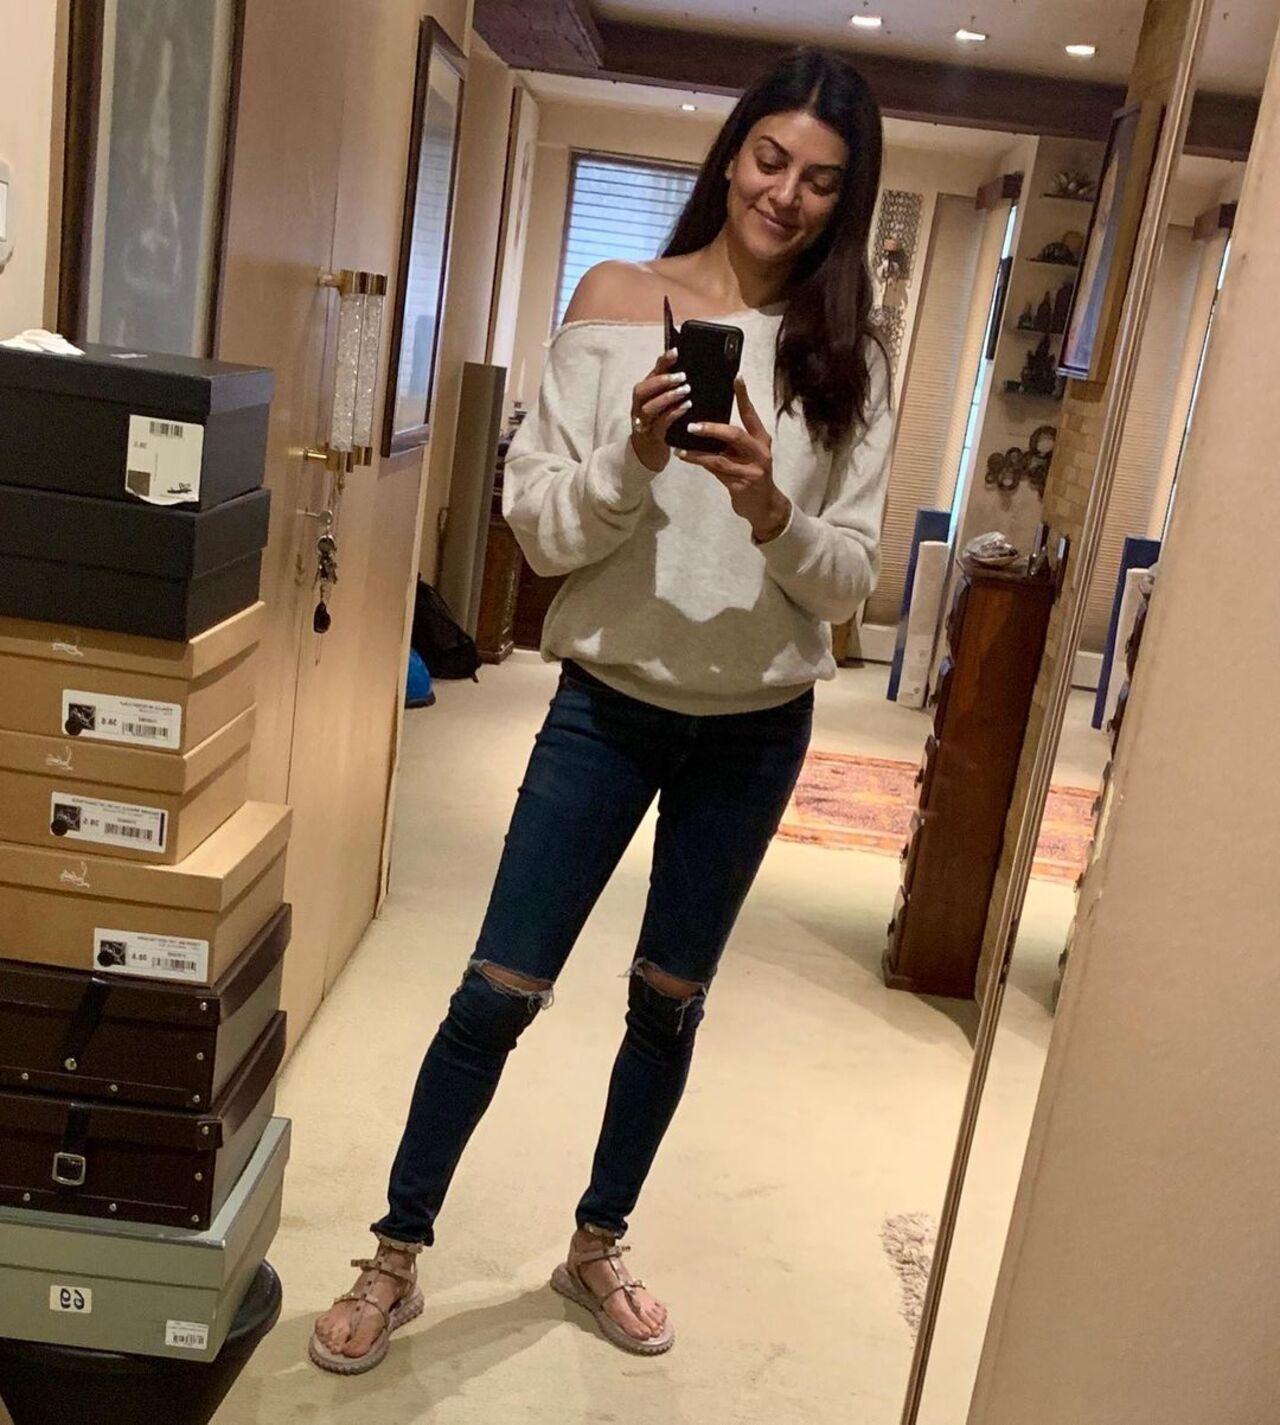 Making casuals look smart and chic is Sushmita's doing. She effortlessly looks stylish in this blue denims paired with an off-shoulder sweatshirt. A perfect look for the Mumbai winter, we say